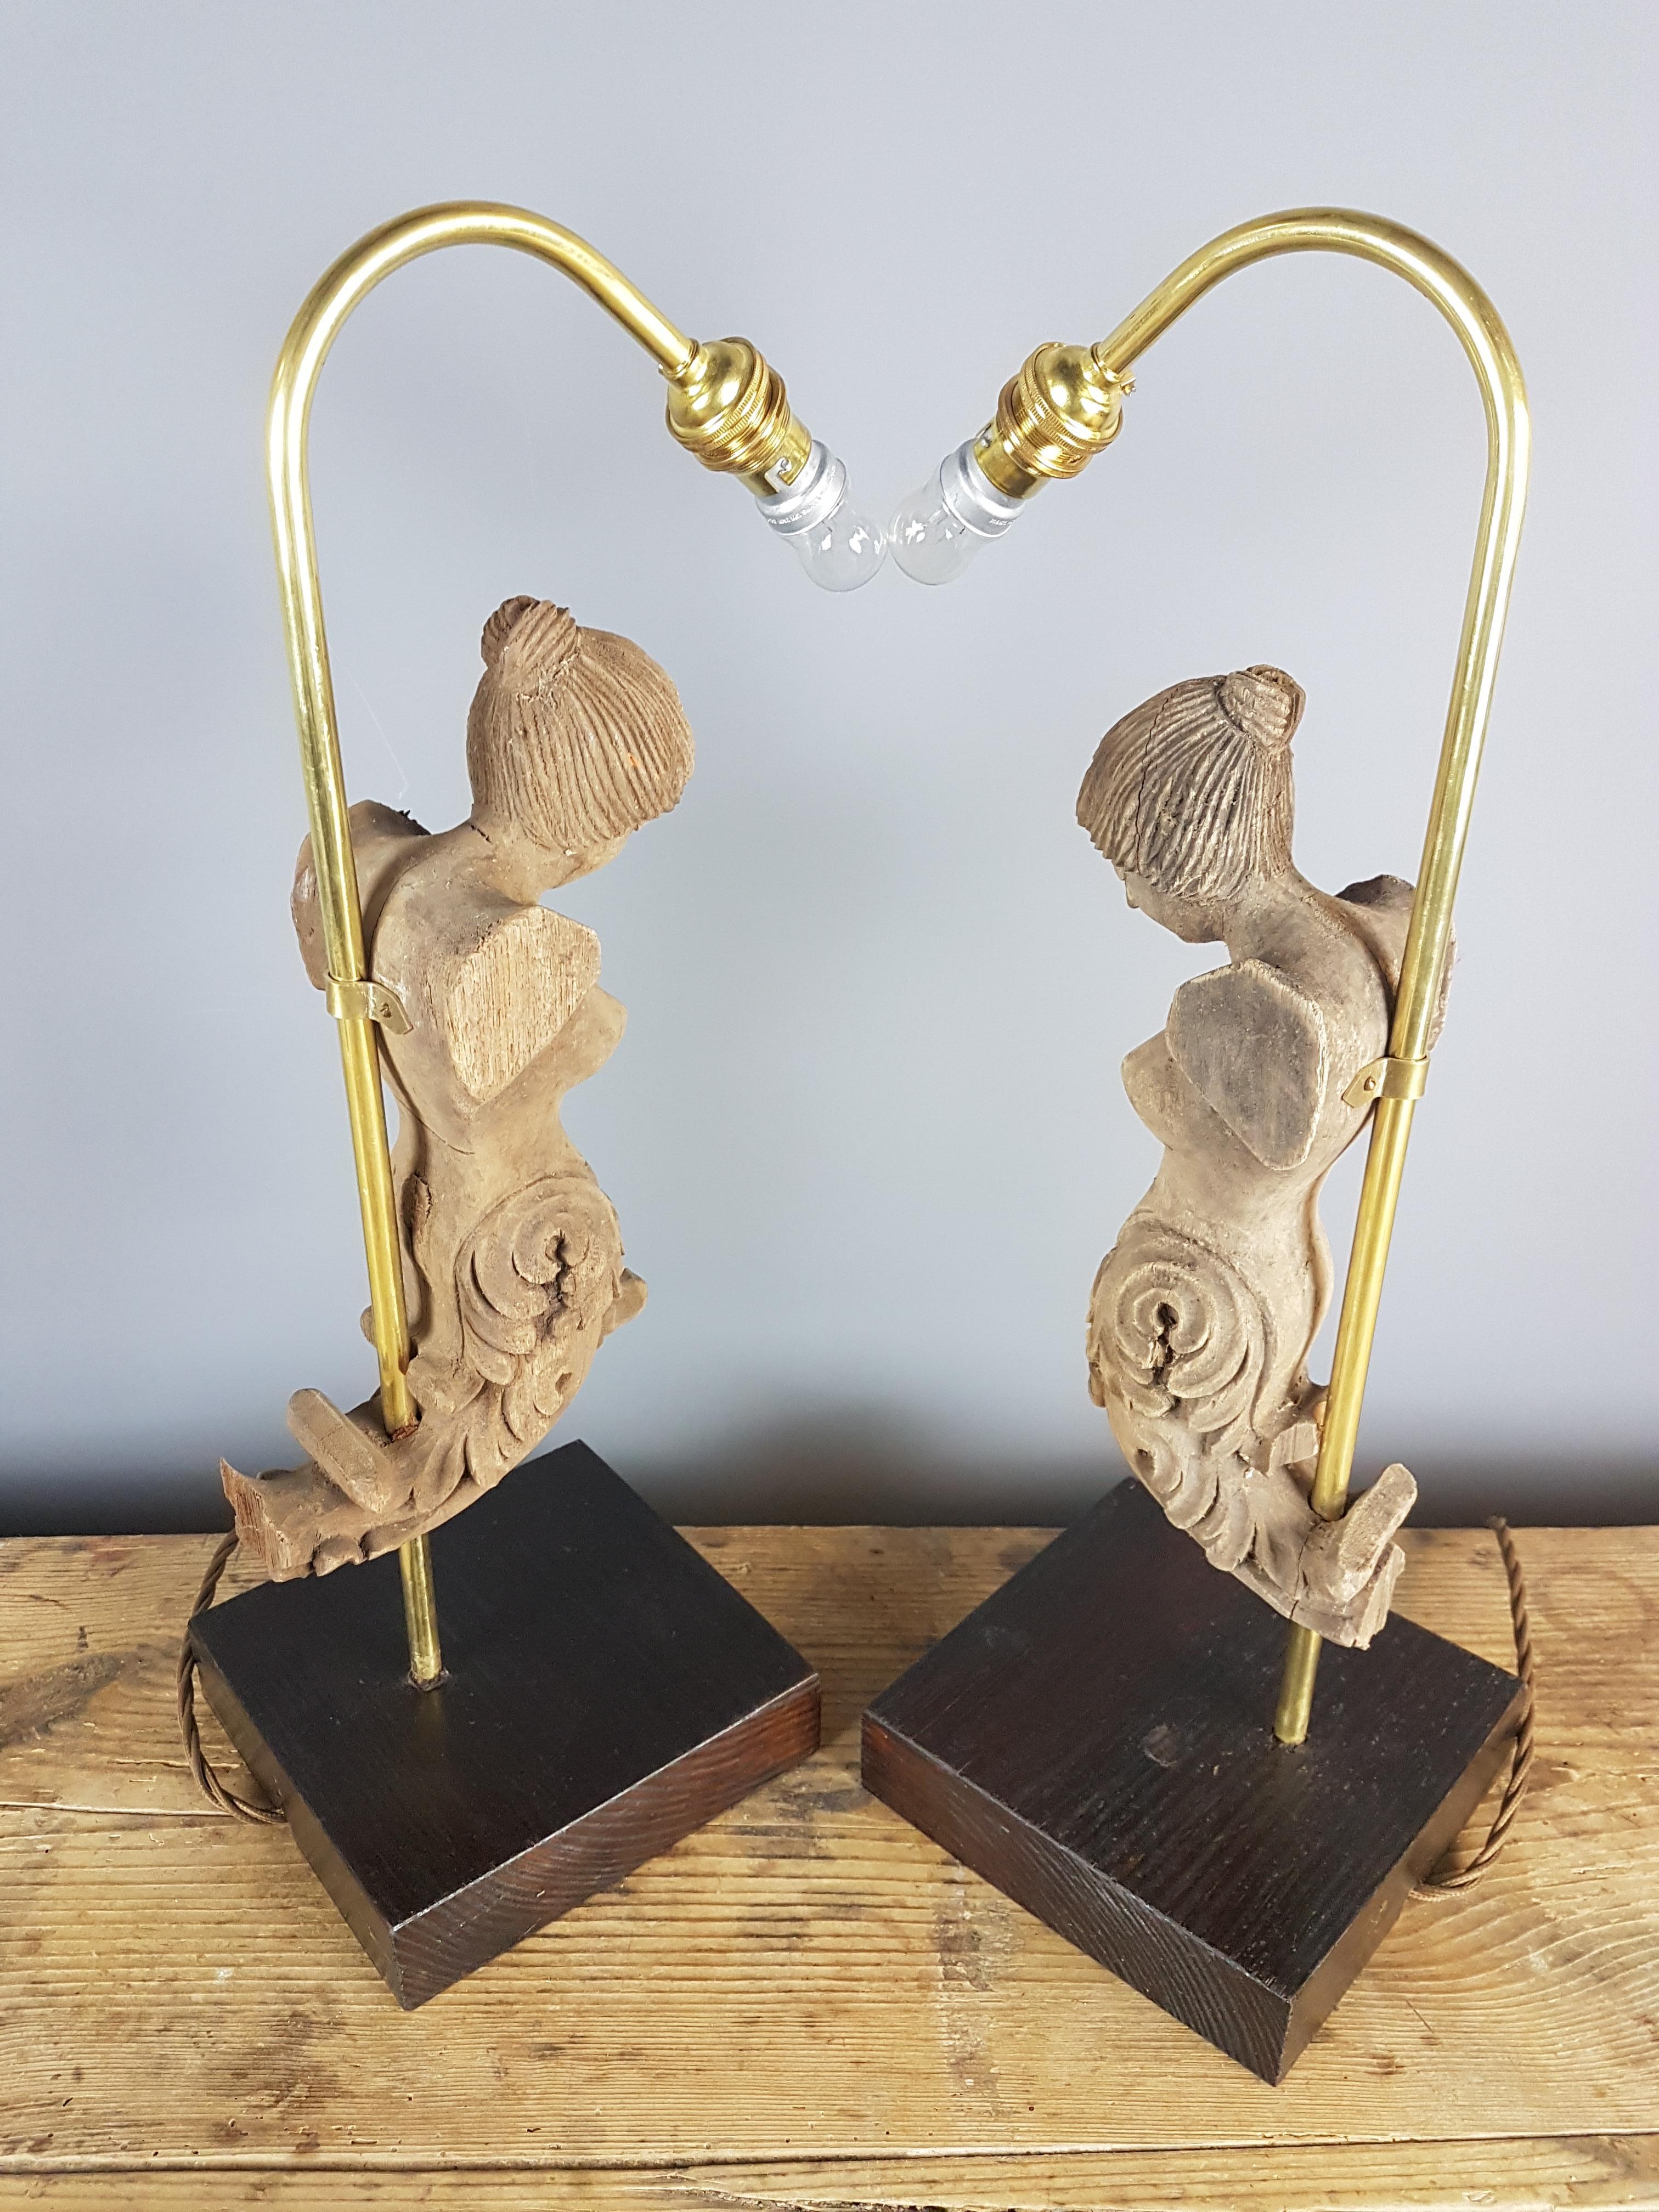 Pair of Mid-20th Century Carved Wooden Mold Form Table Lamps In Distressed Condition For Sale In Bodicote, Oxfordshire